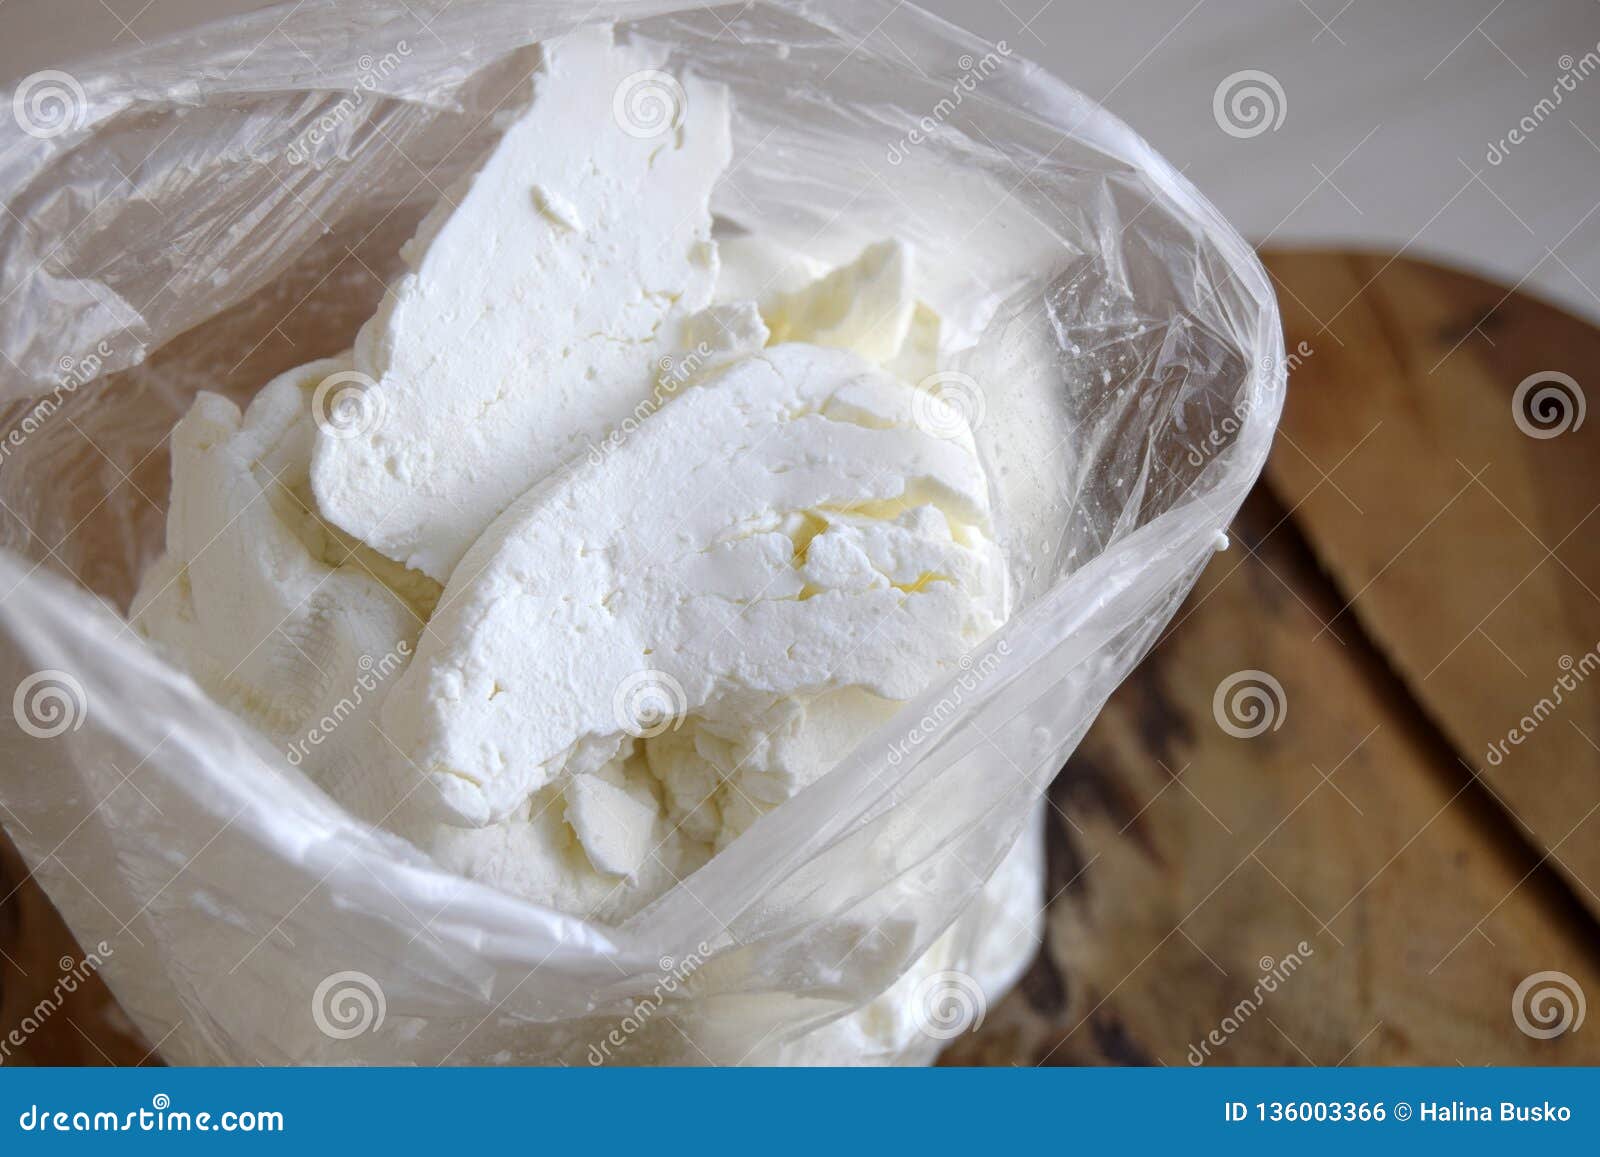 Cottage Cheese Is Classical Dairy Product Cottage Cheese Is In A